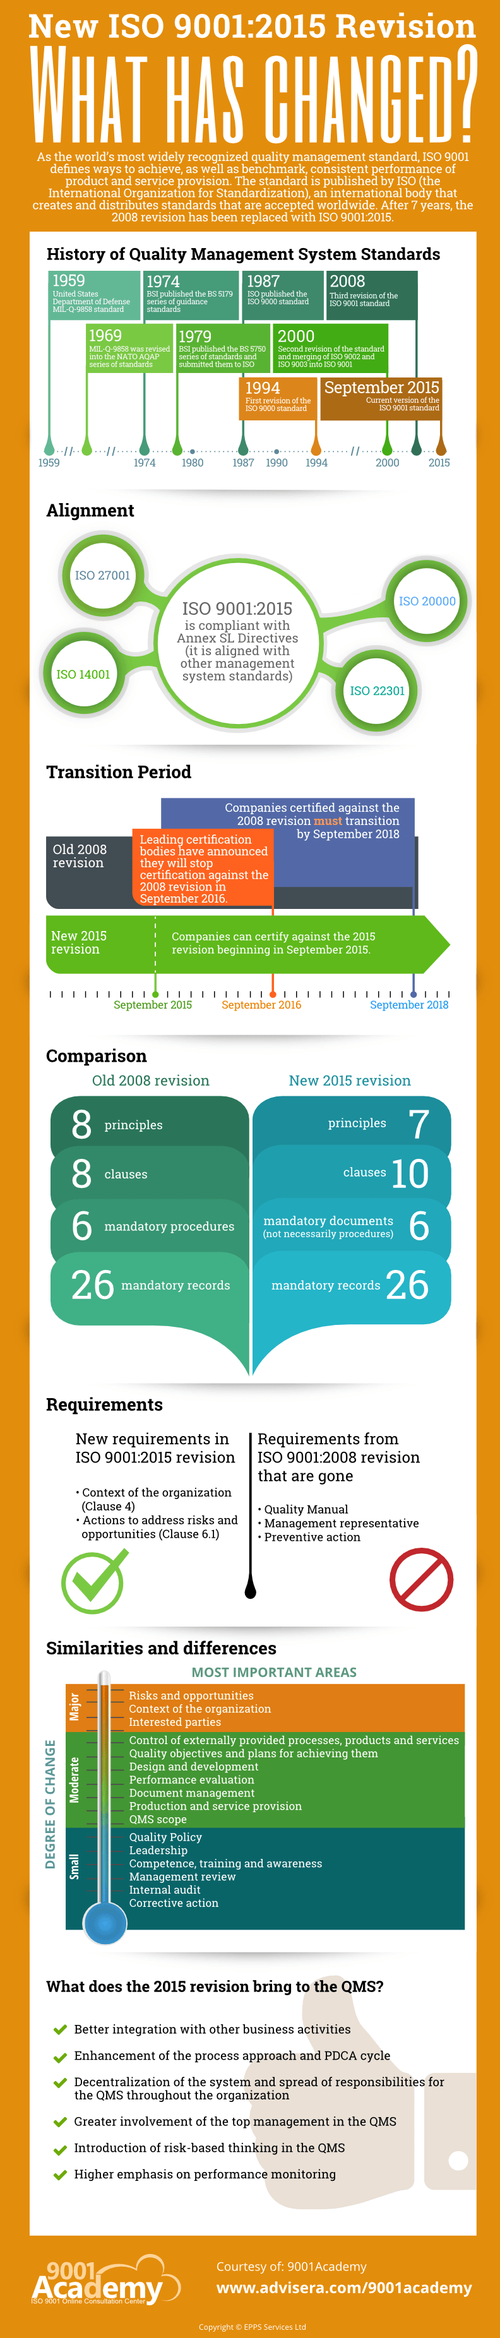 Advisera-ISO-9001-2015-infographic.png